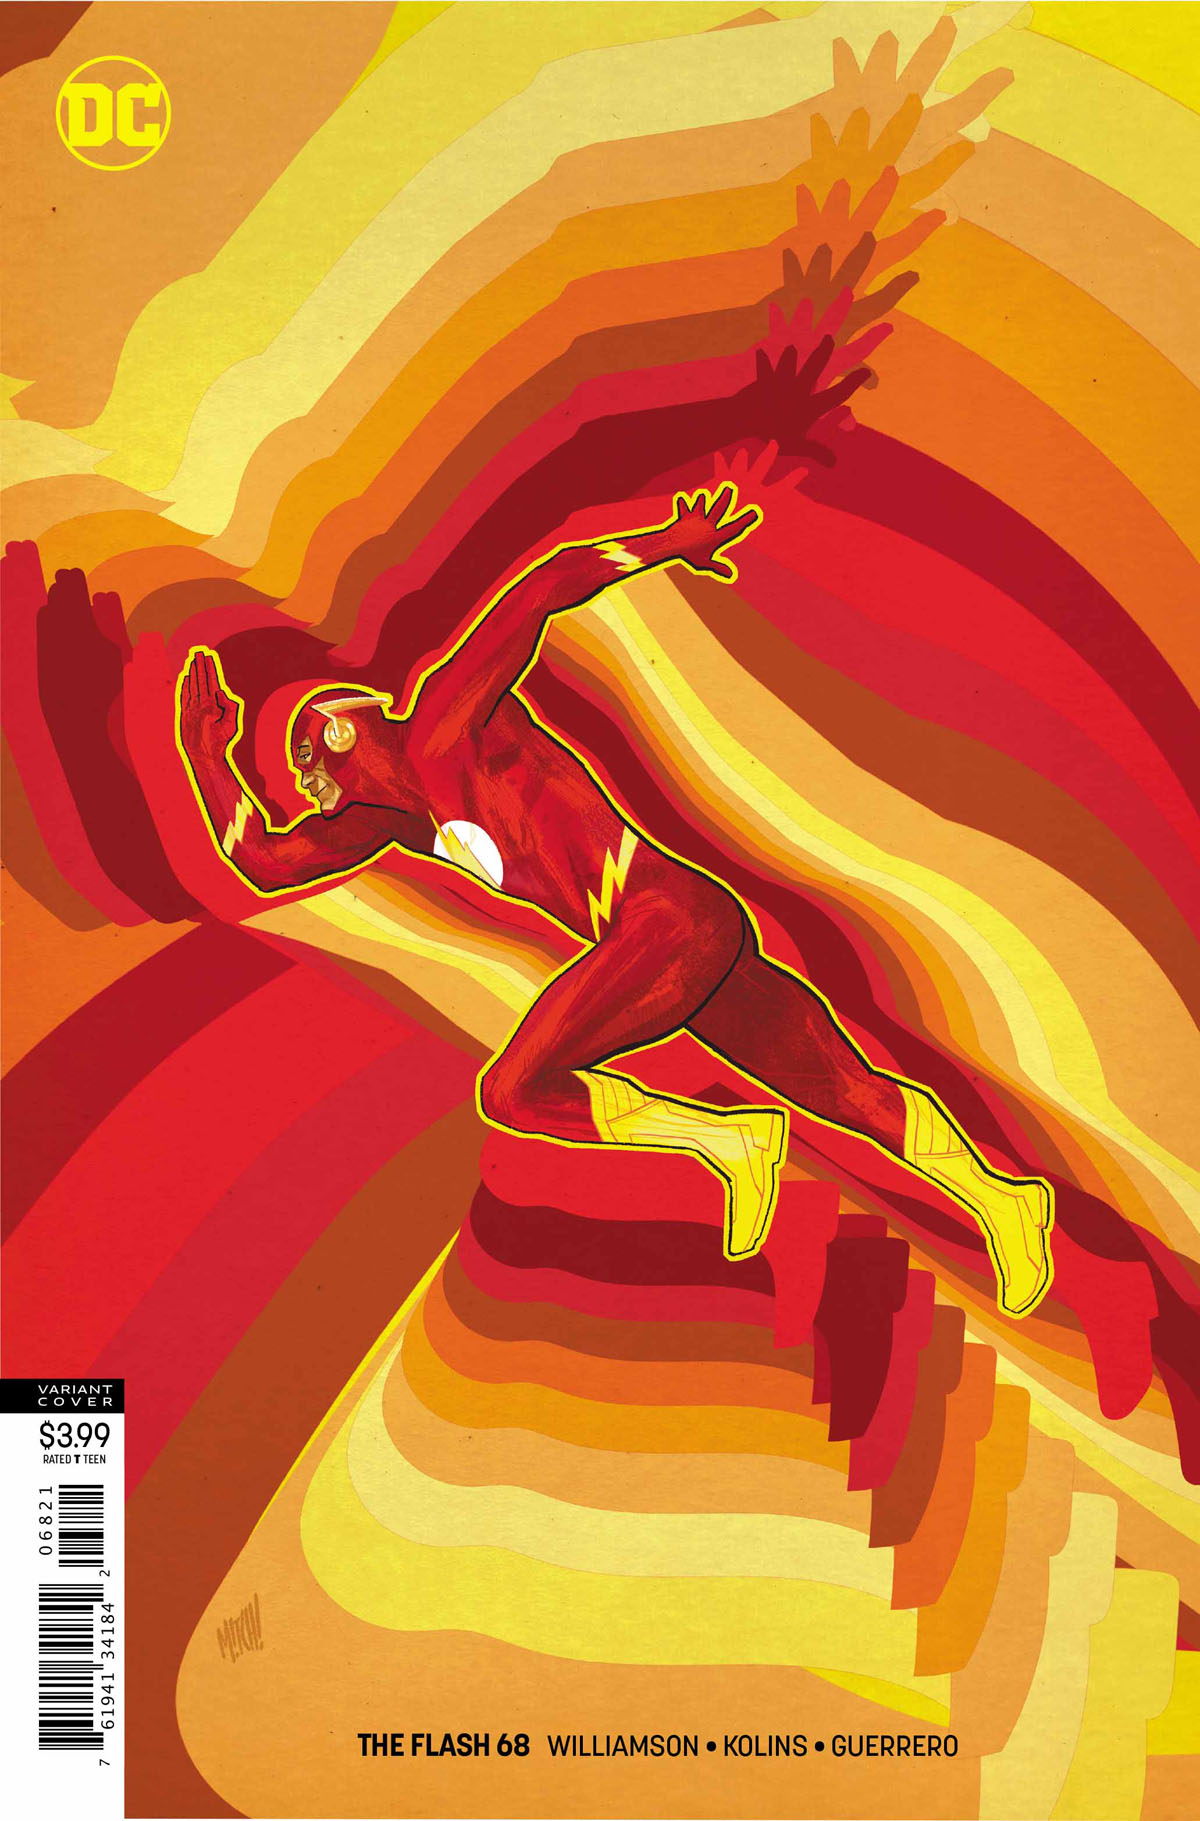 The Flash #68 variant cover